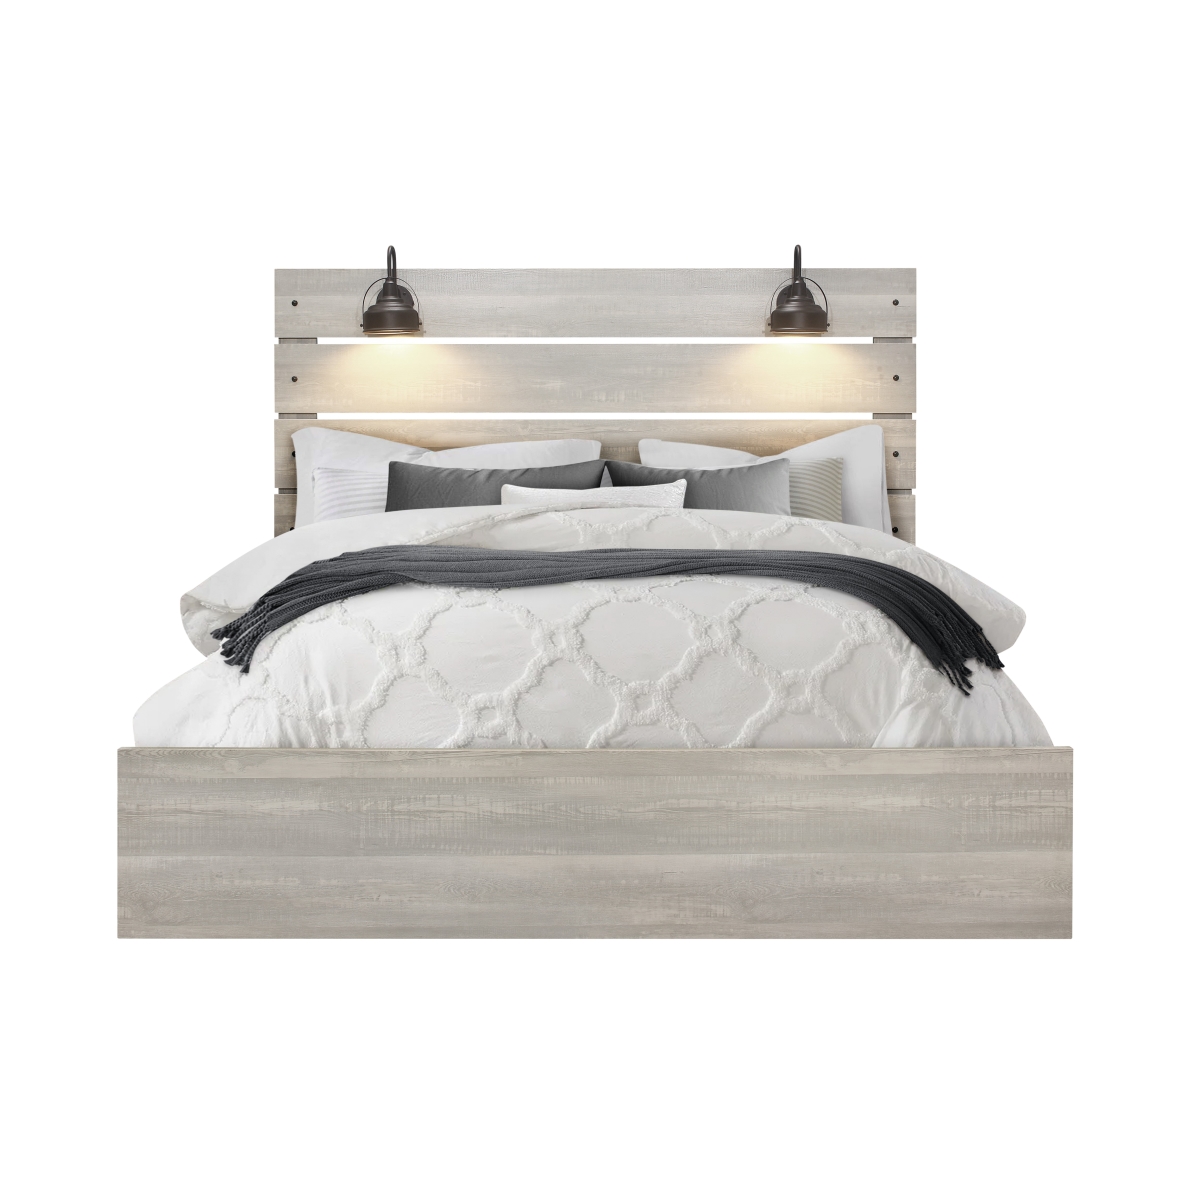 LINWOOD-WHITE WASH-KB-N Linwood White Wash King Size Bed with Lamps -  Global Furniture USA